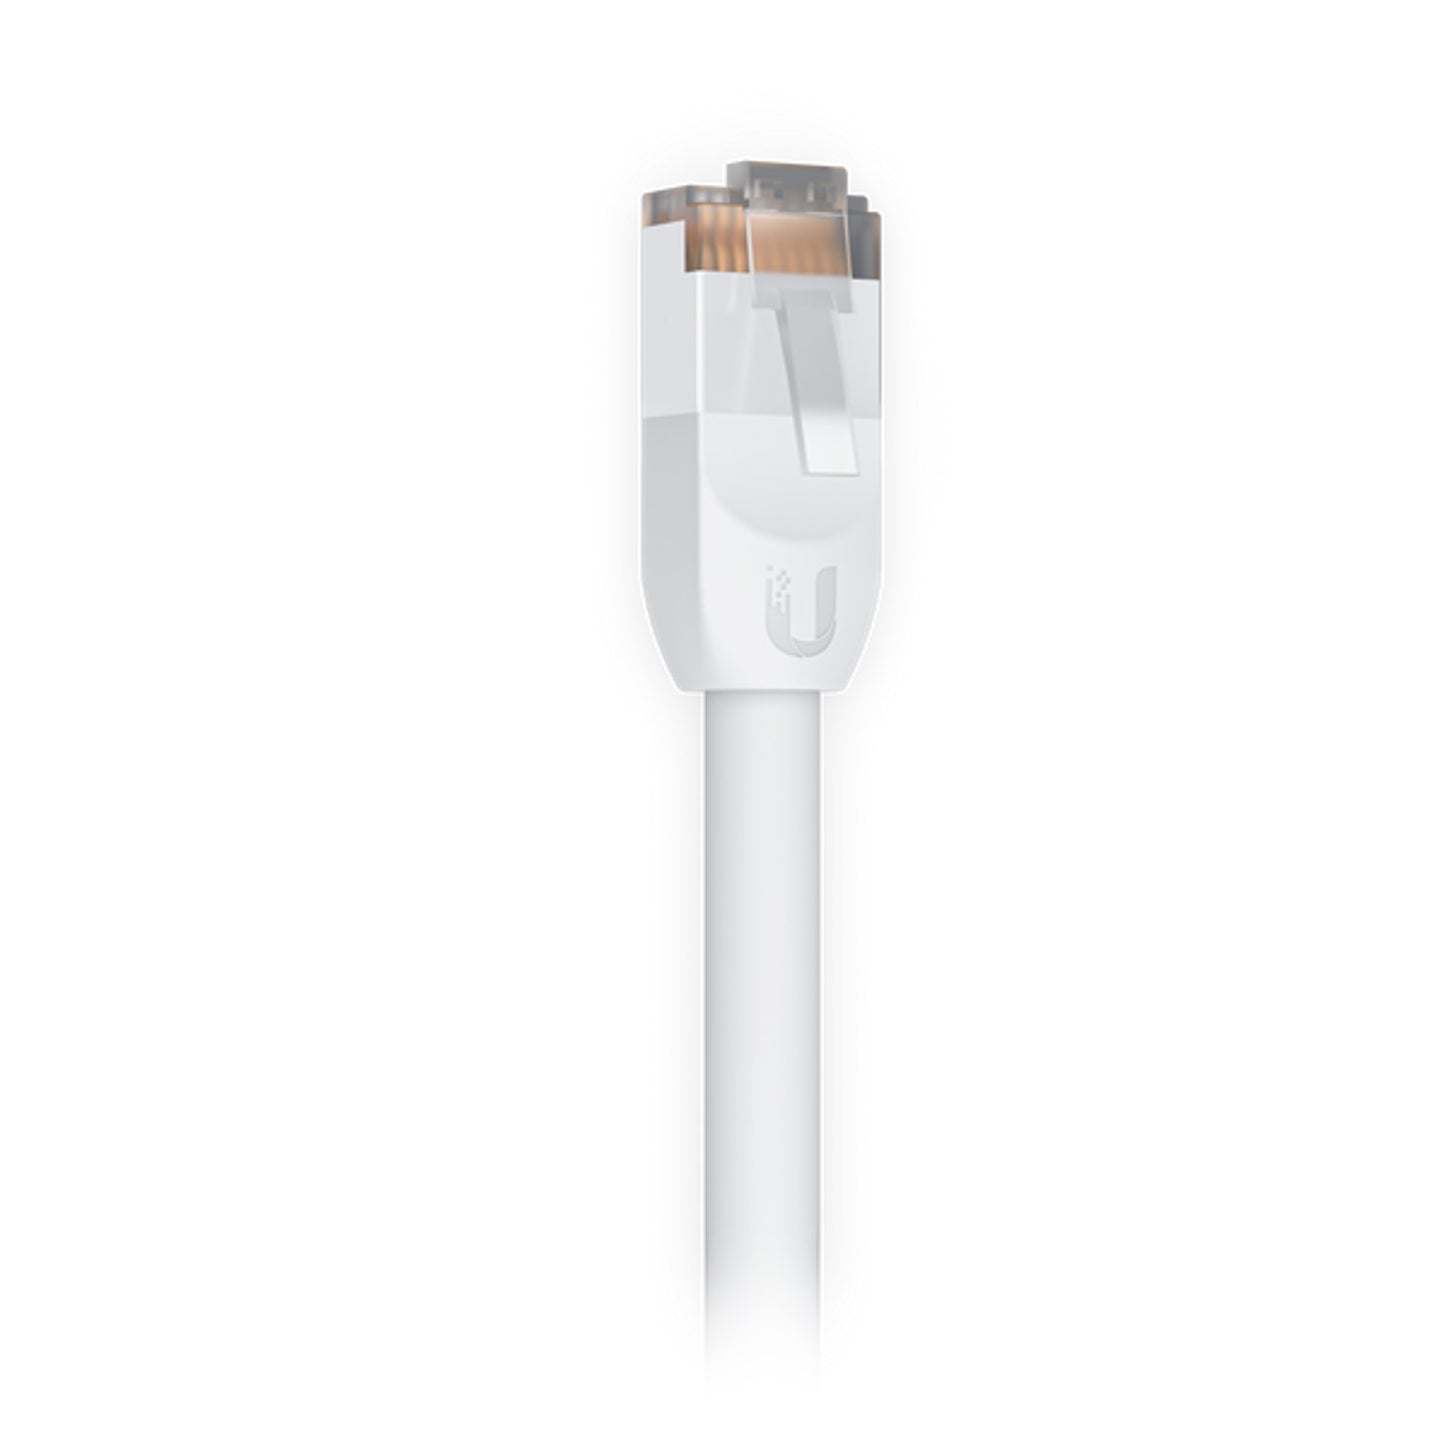 Ubiquiti UniFi Patch Cable Outdoor 8M White, Single Unit, All-weather, RJ45 Ethernet Cable, Category 5e, 2Yr Warr UACC-Cable-Patch-Outdoor-8M-W